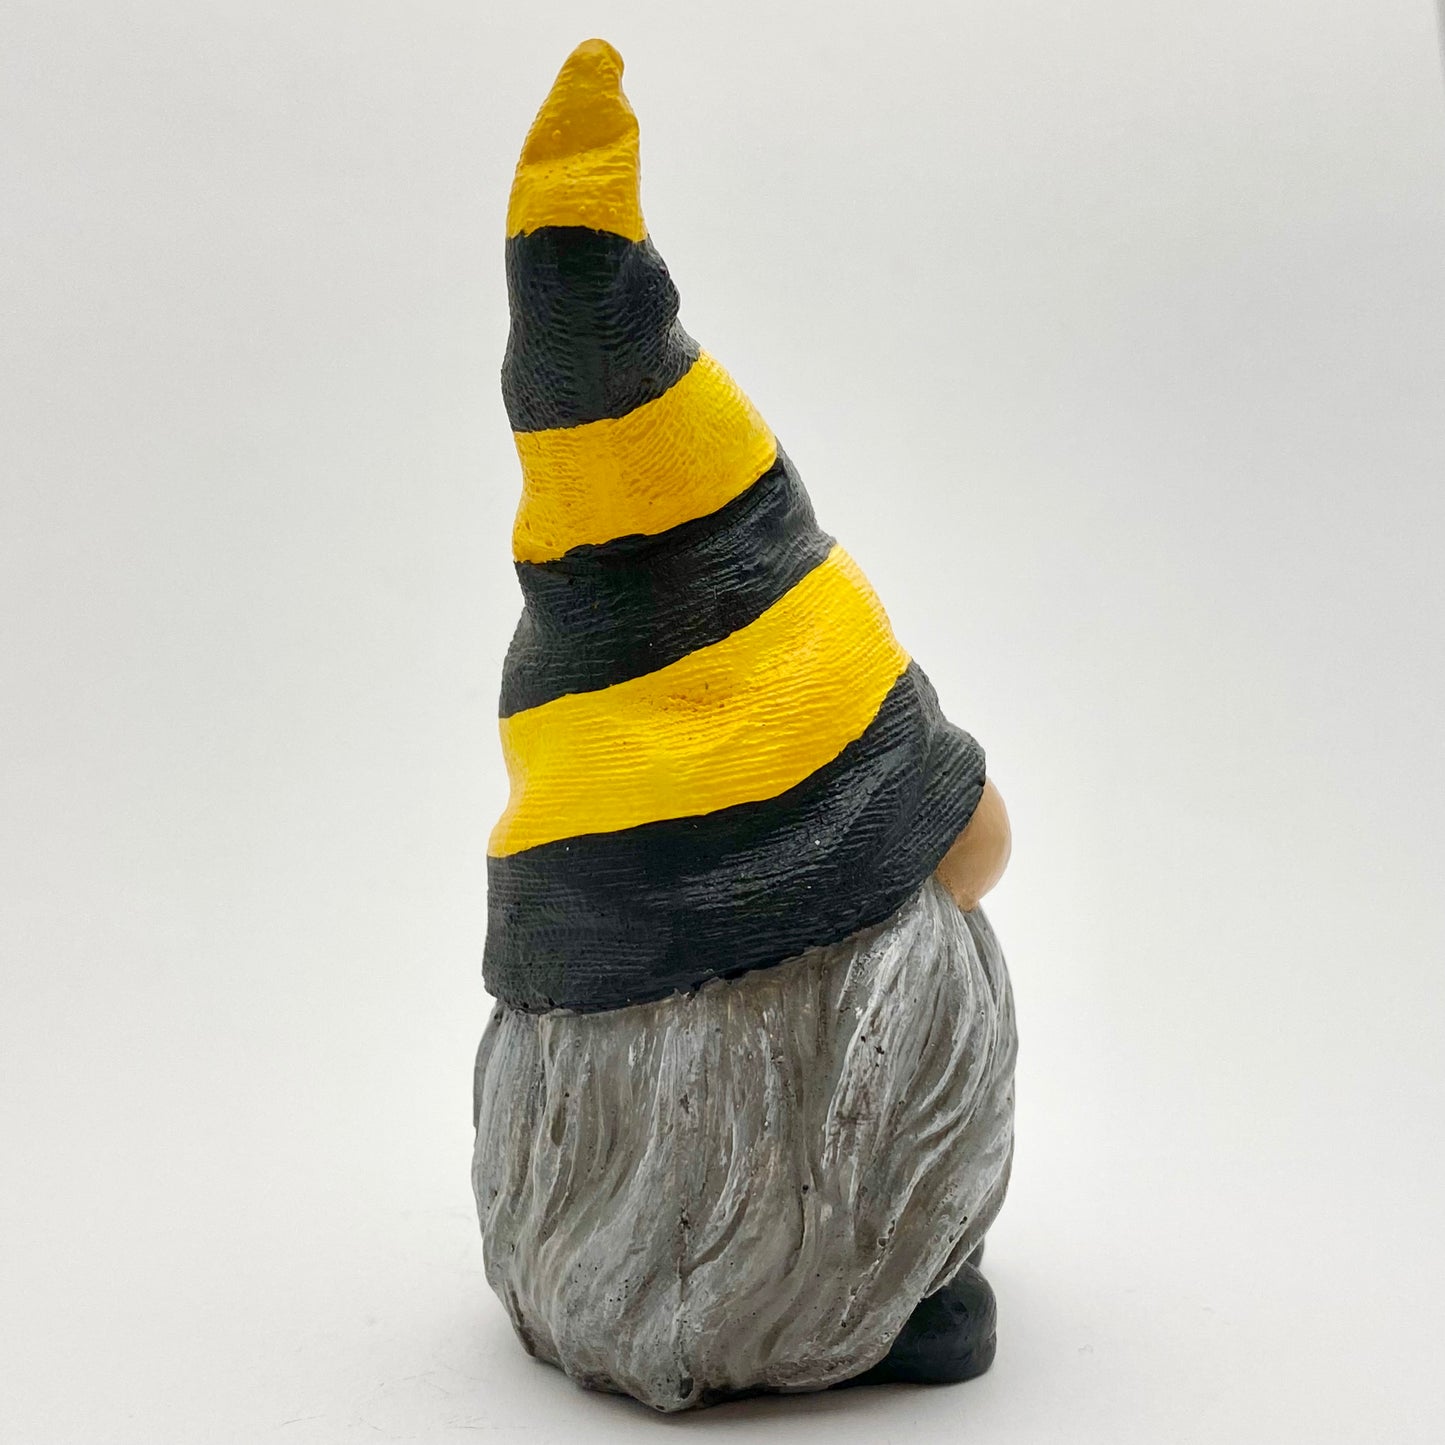 Hand painted Gonk statue with yellow and black striped Bee Hat